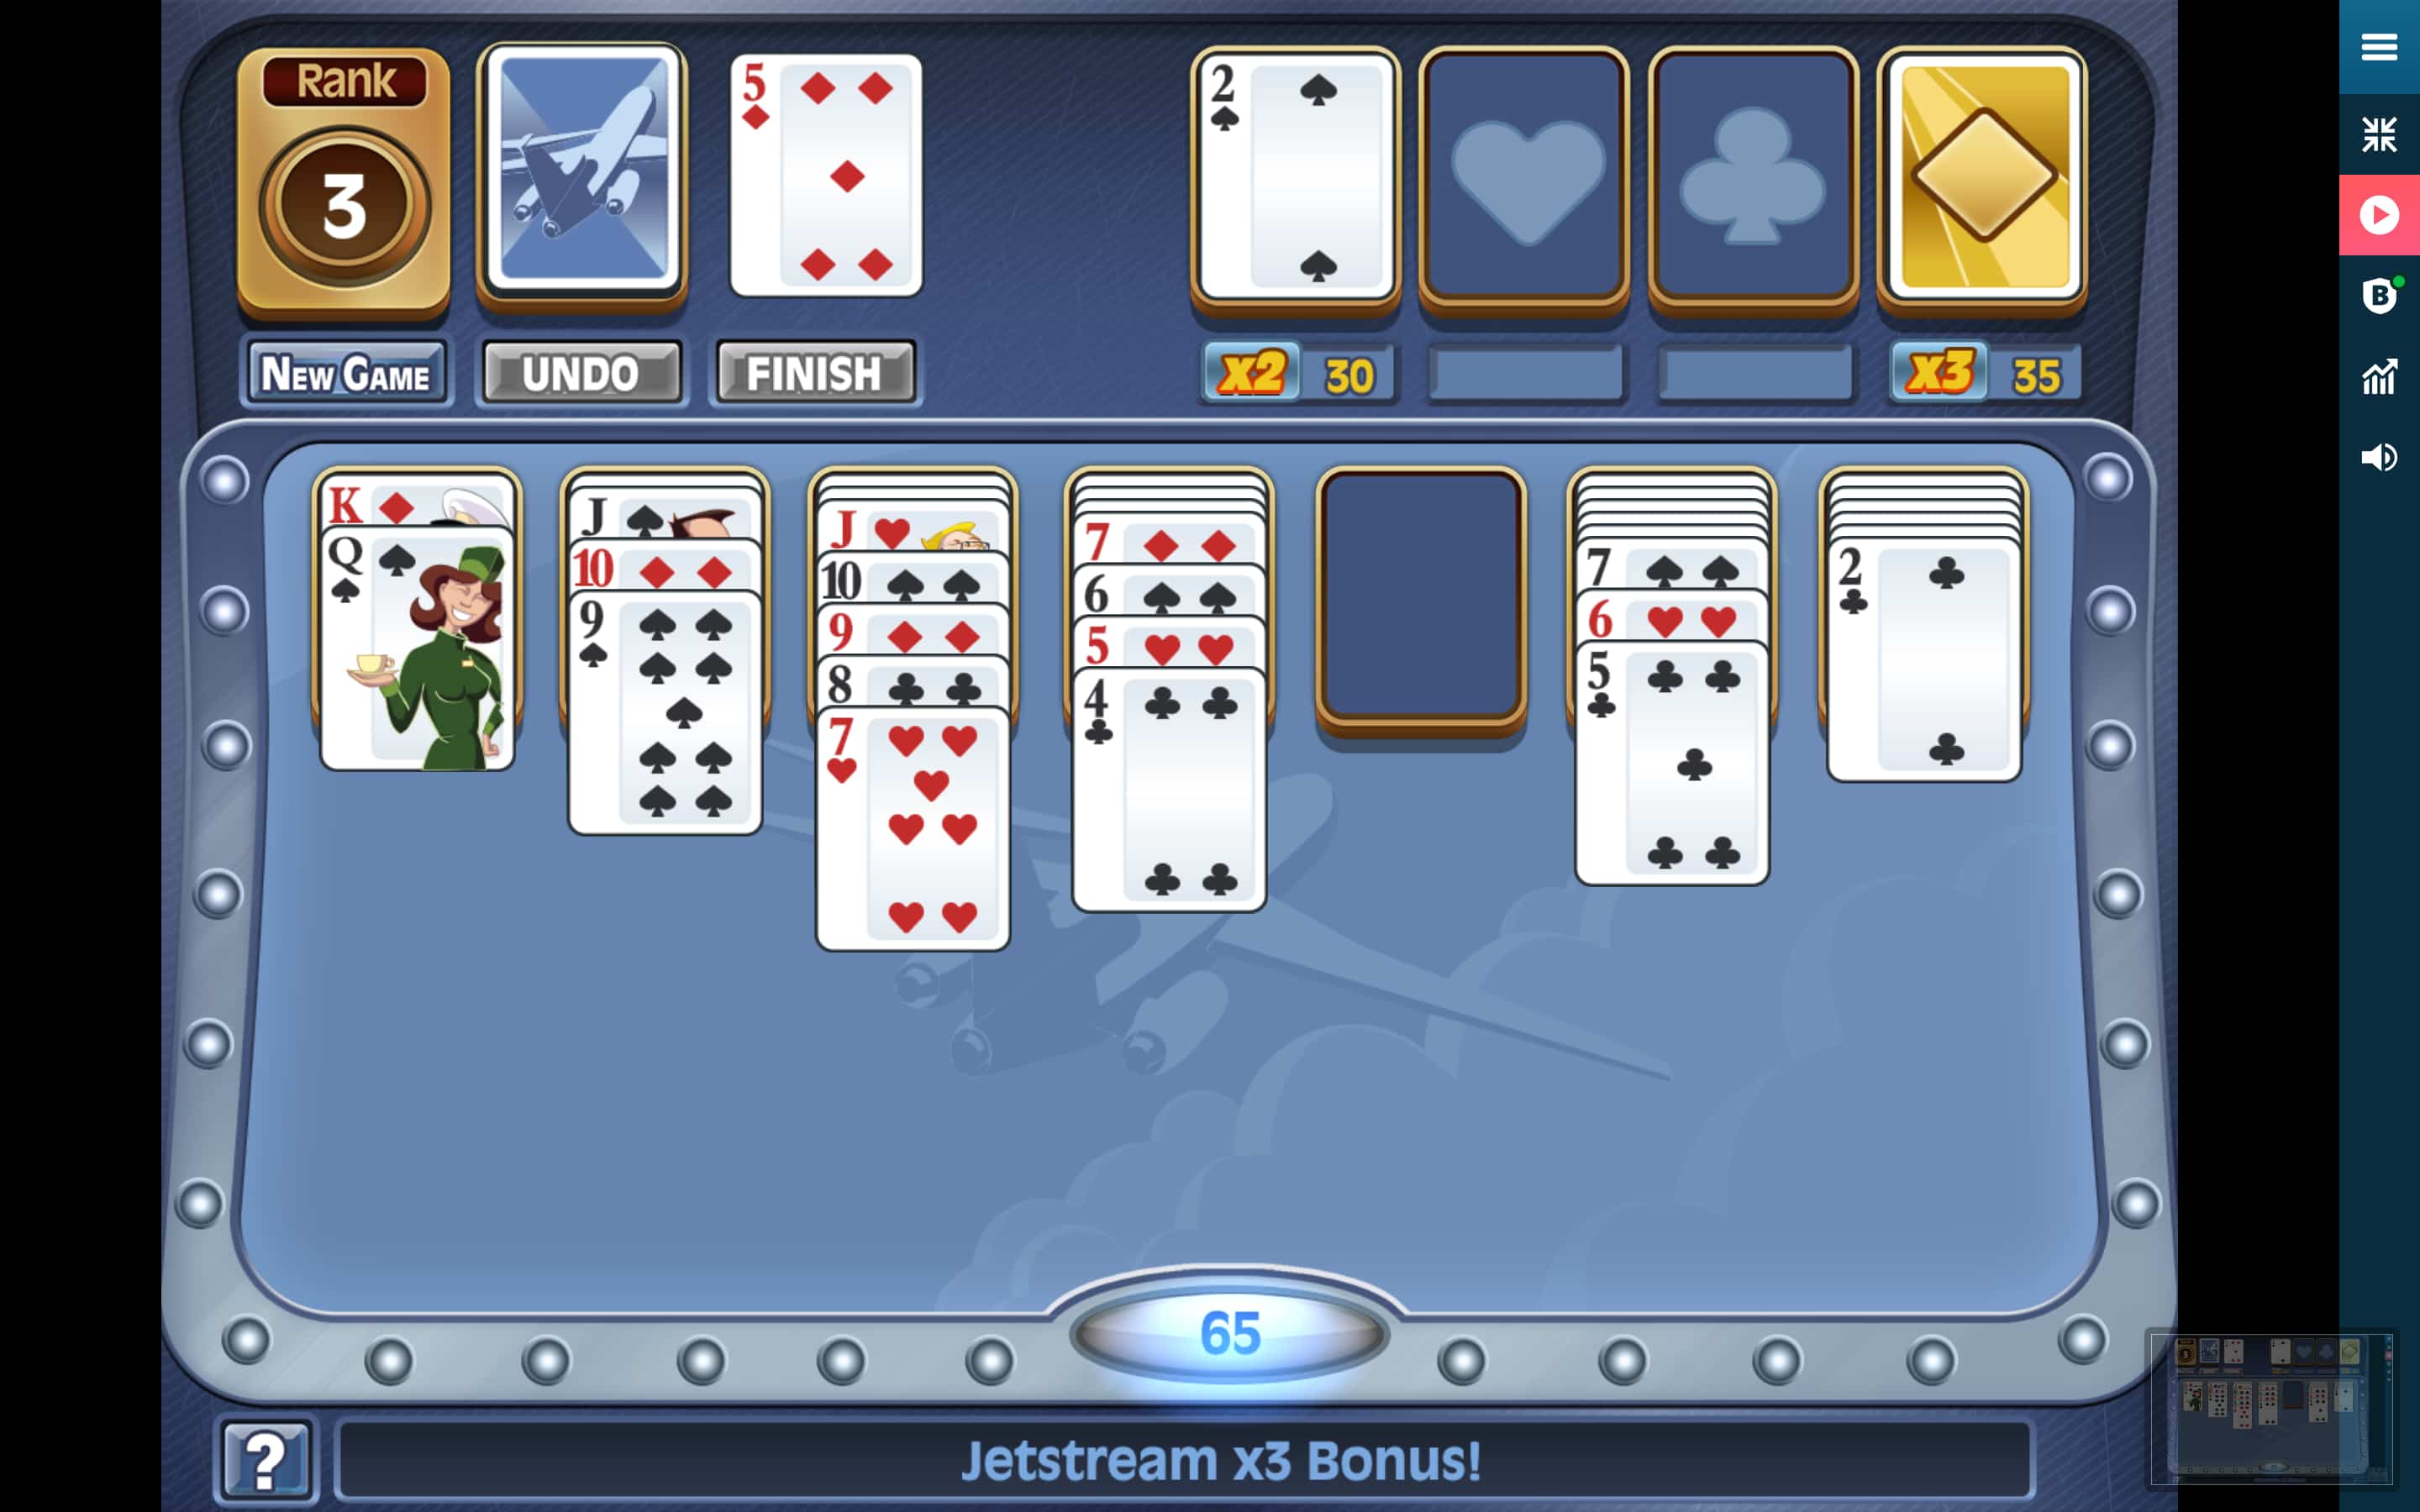 world of solitaire app